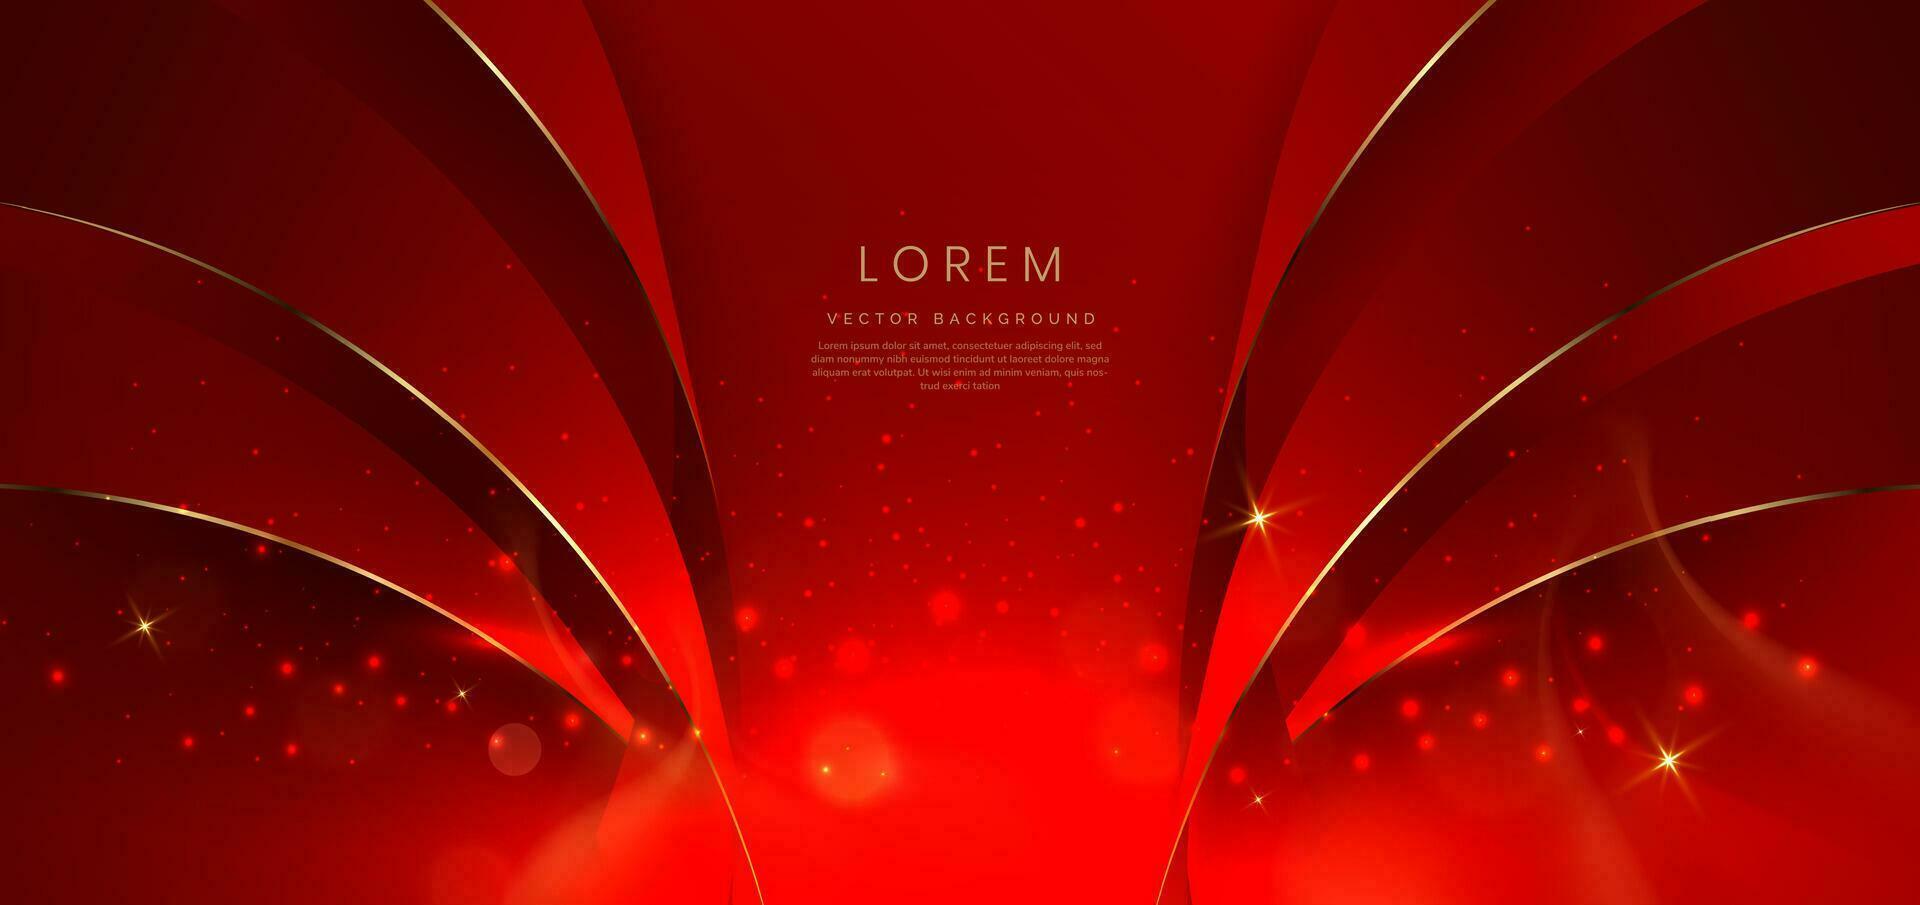 Abstract curved red shape on red background with lighting effect and copy space for text. Luxury design style. vector